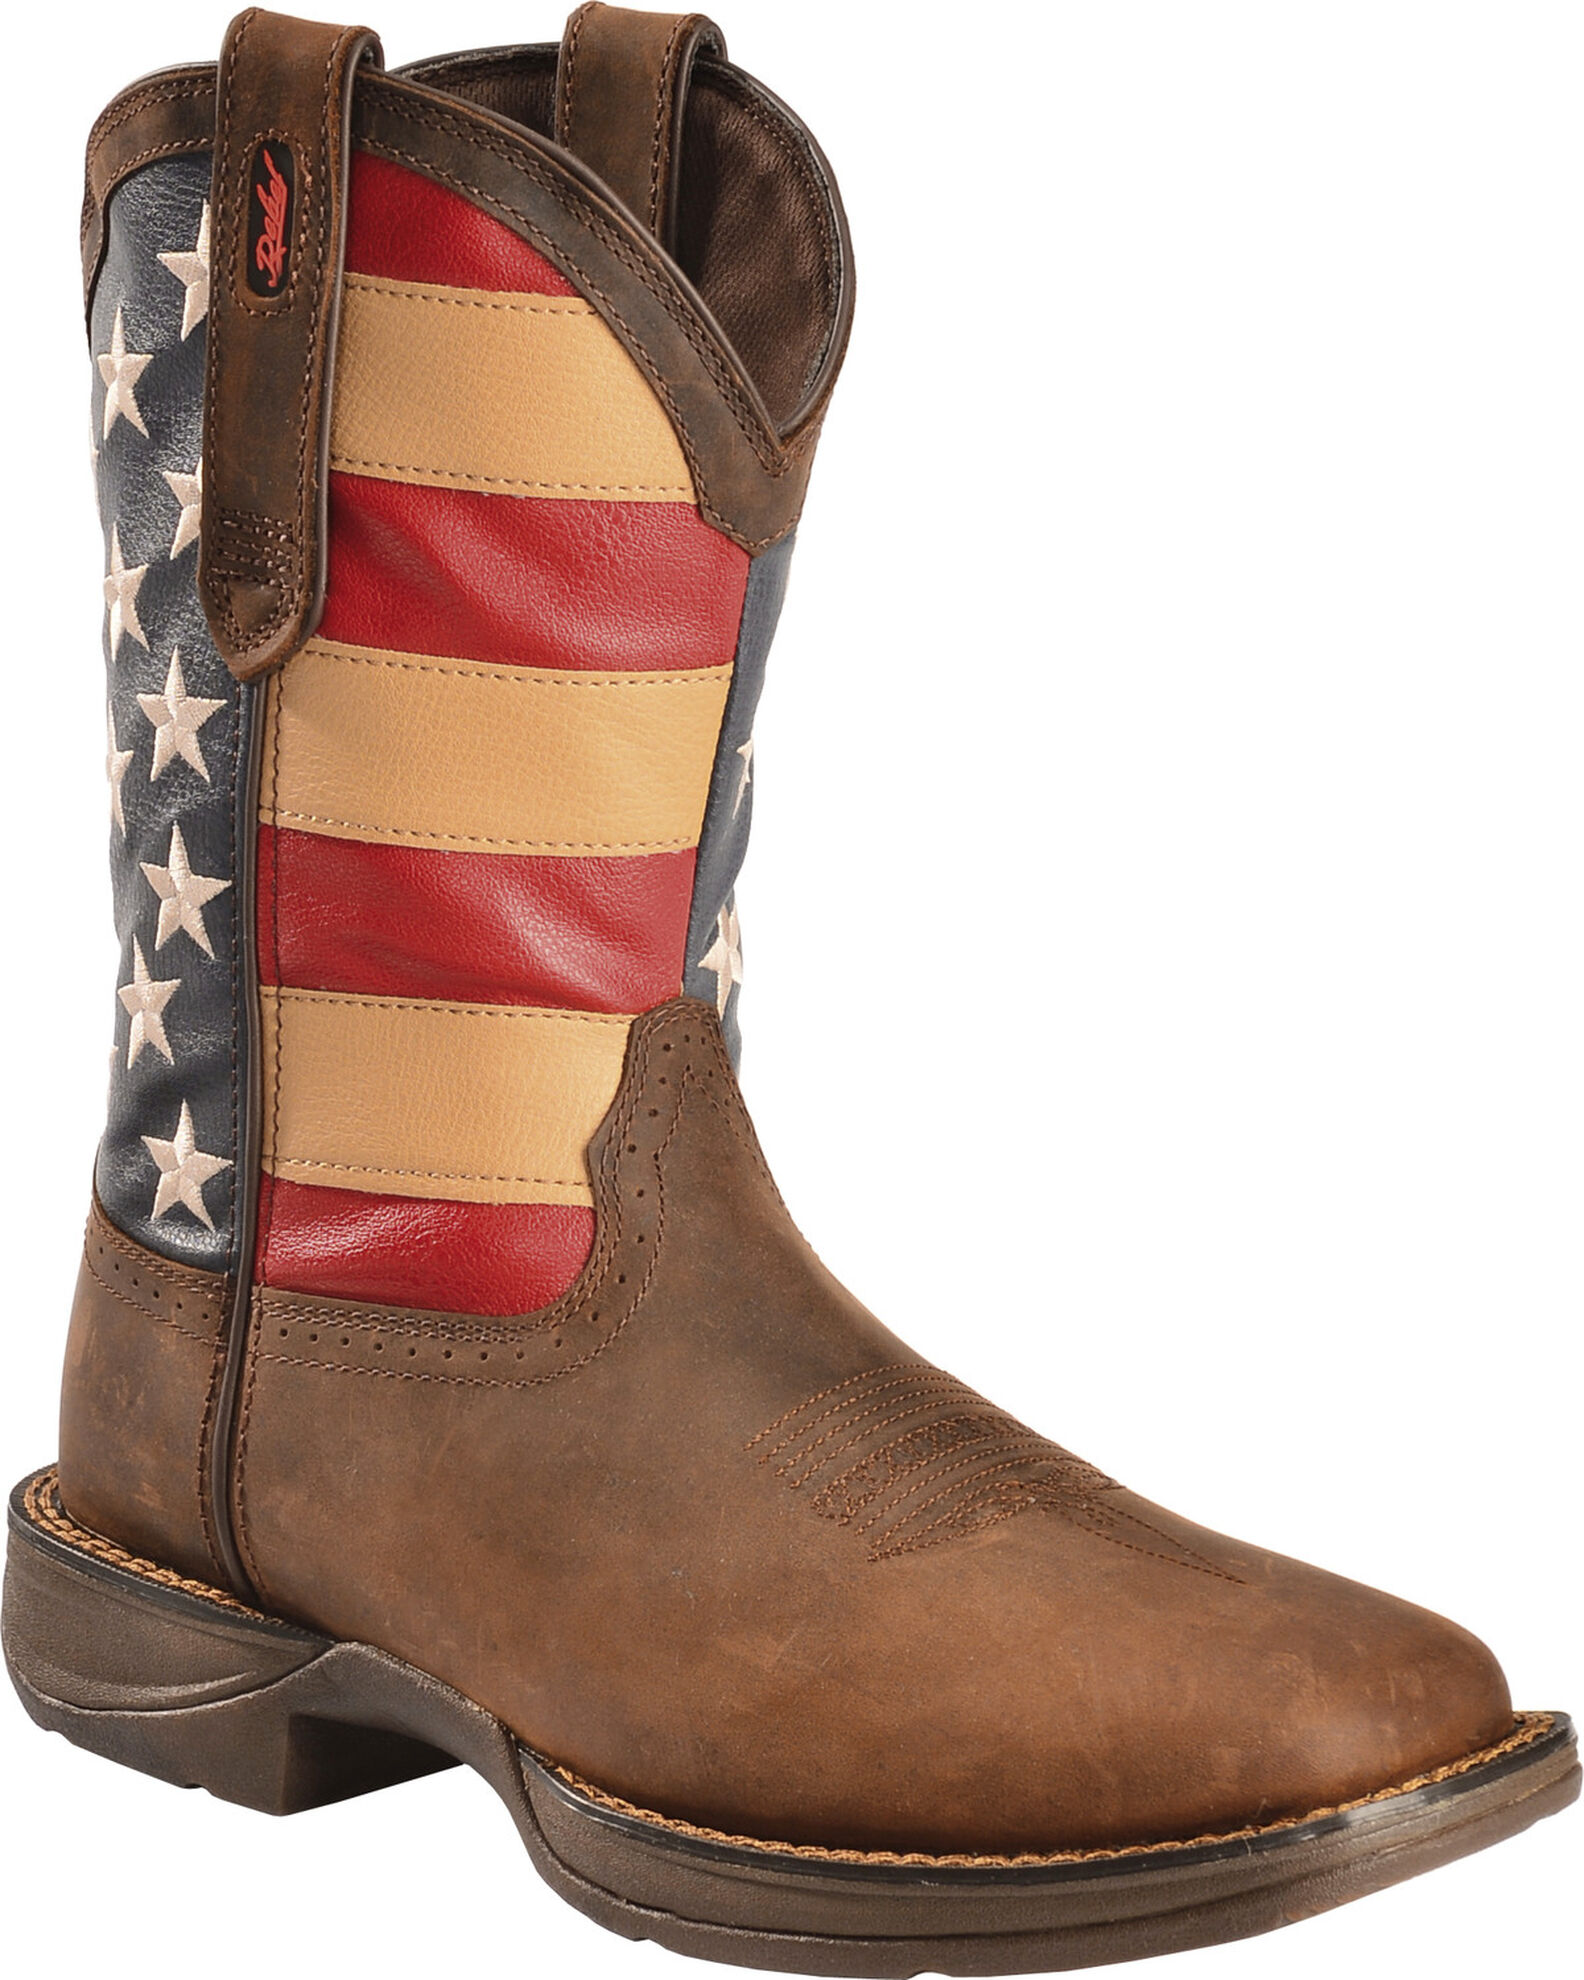 Boot Barn Credit Card Login, Payment Methods, & Fees [2023]